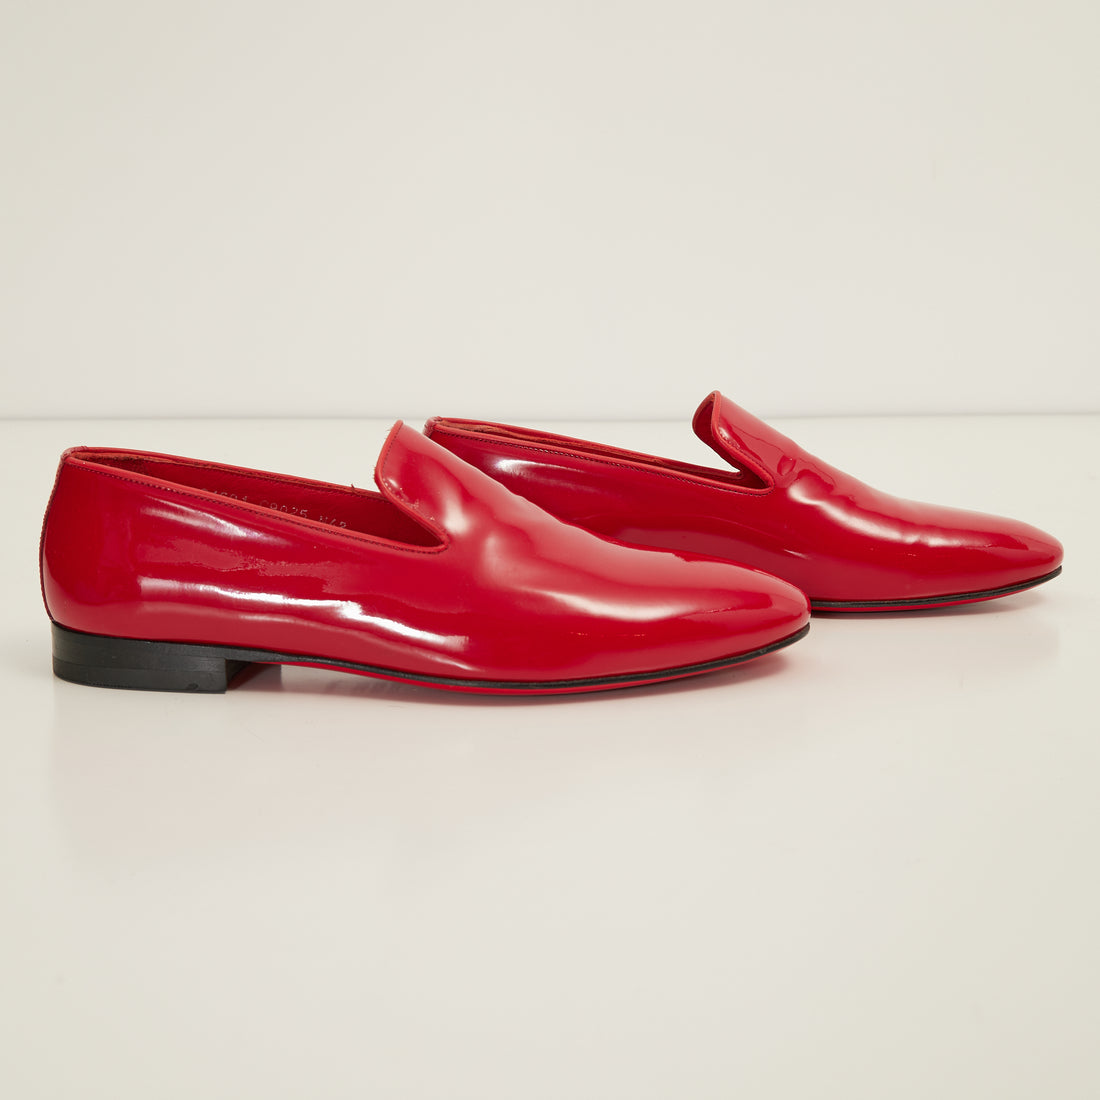 N° C9016 THE FORMAL LEATHER LOAFER - RED PATENT